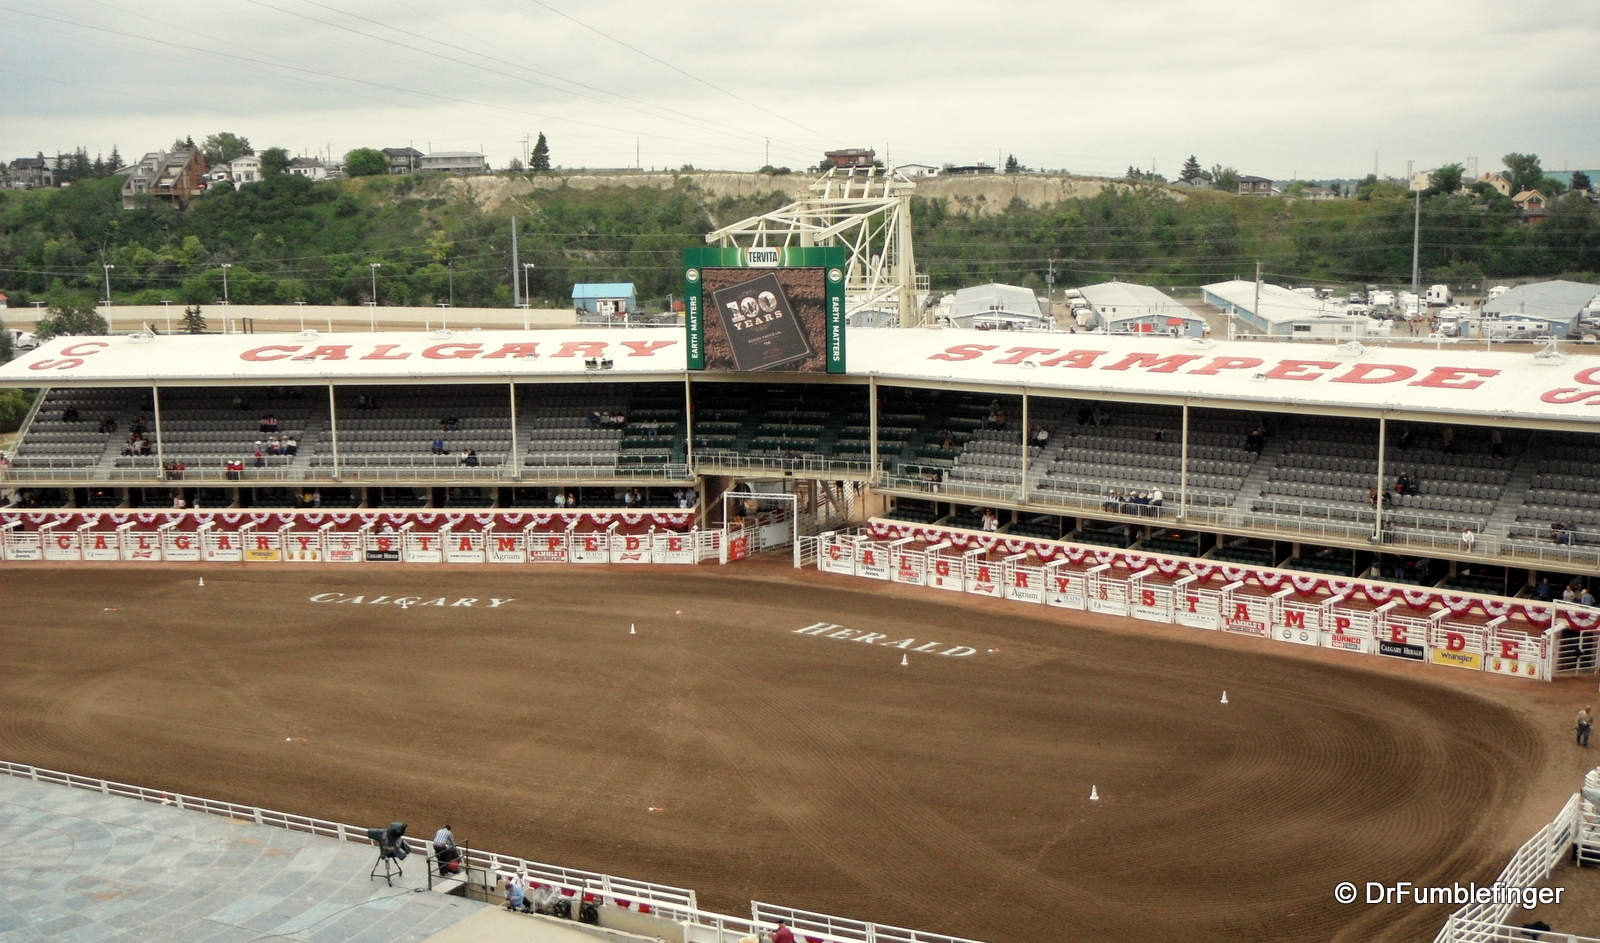 Rodeo grounds viewed from grandstand